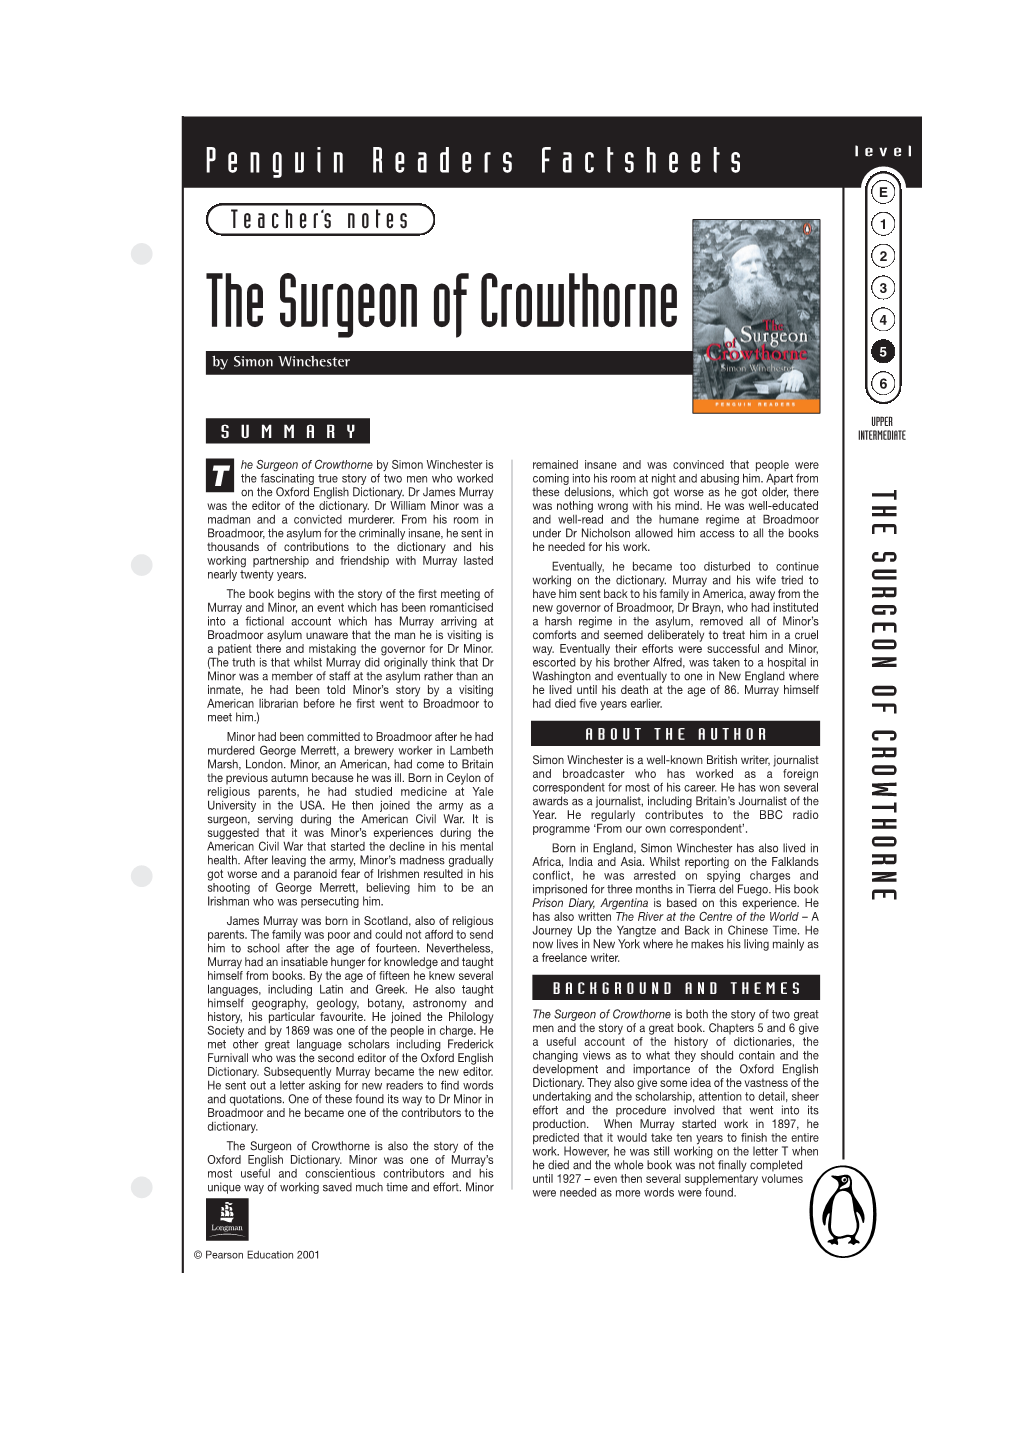 The Surgeon of Crowthorne 4 5 by Simon Winchester 6